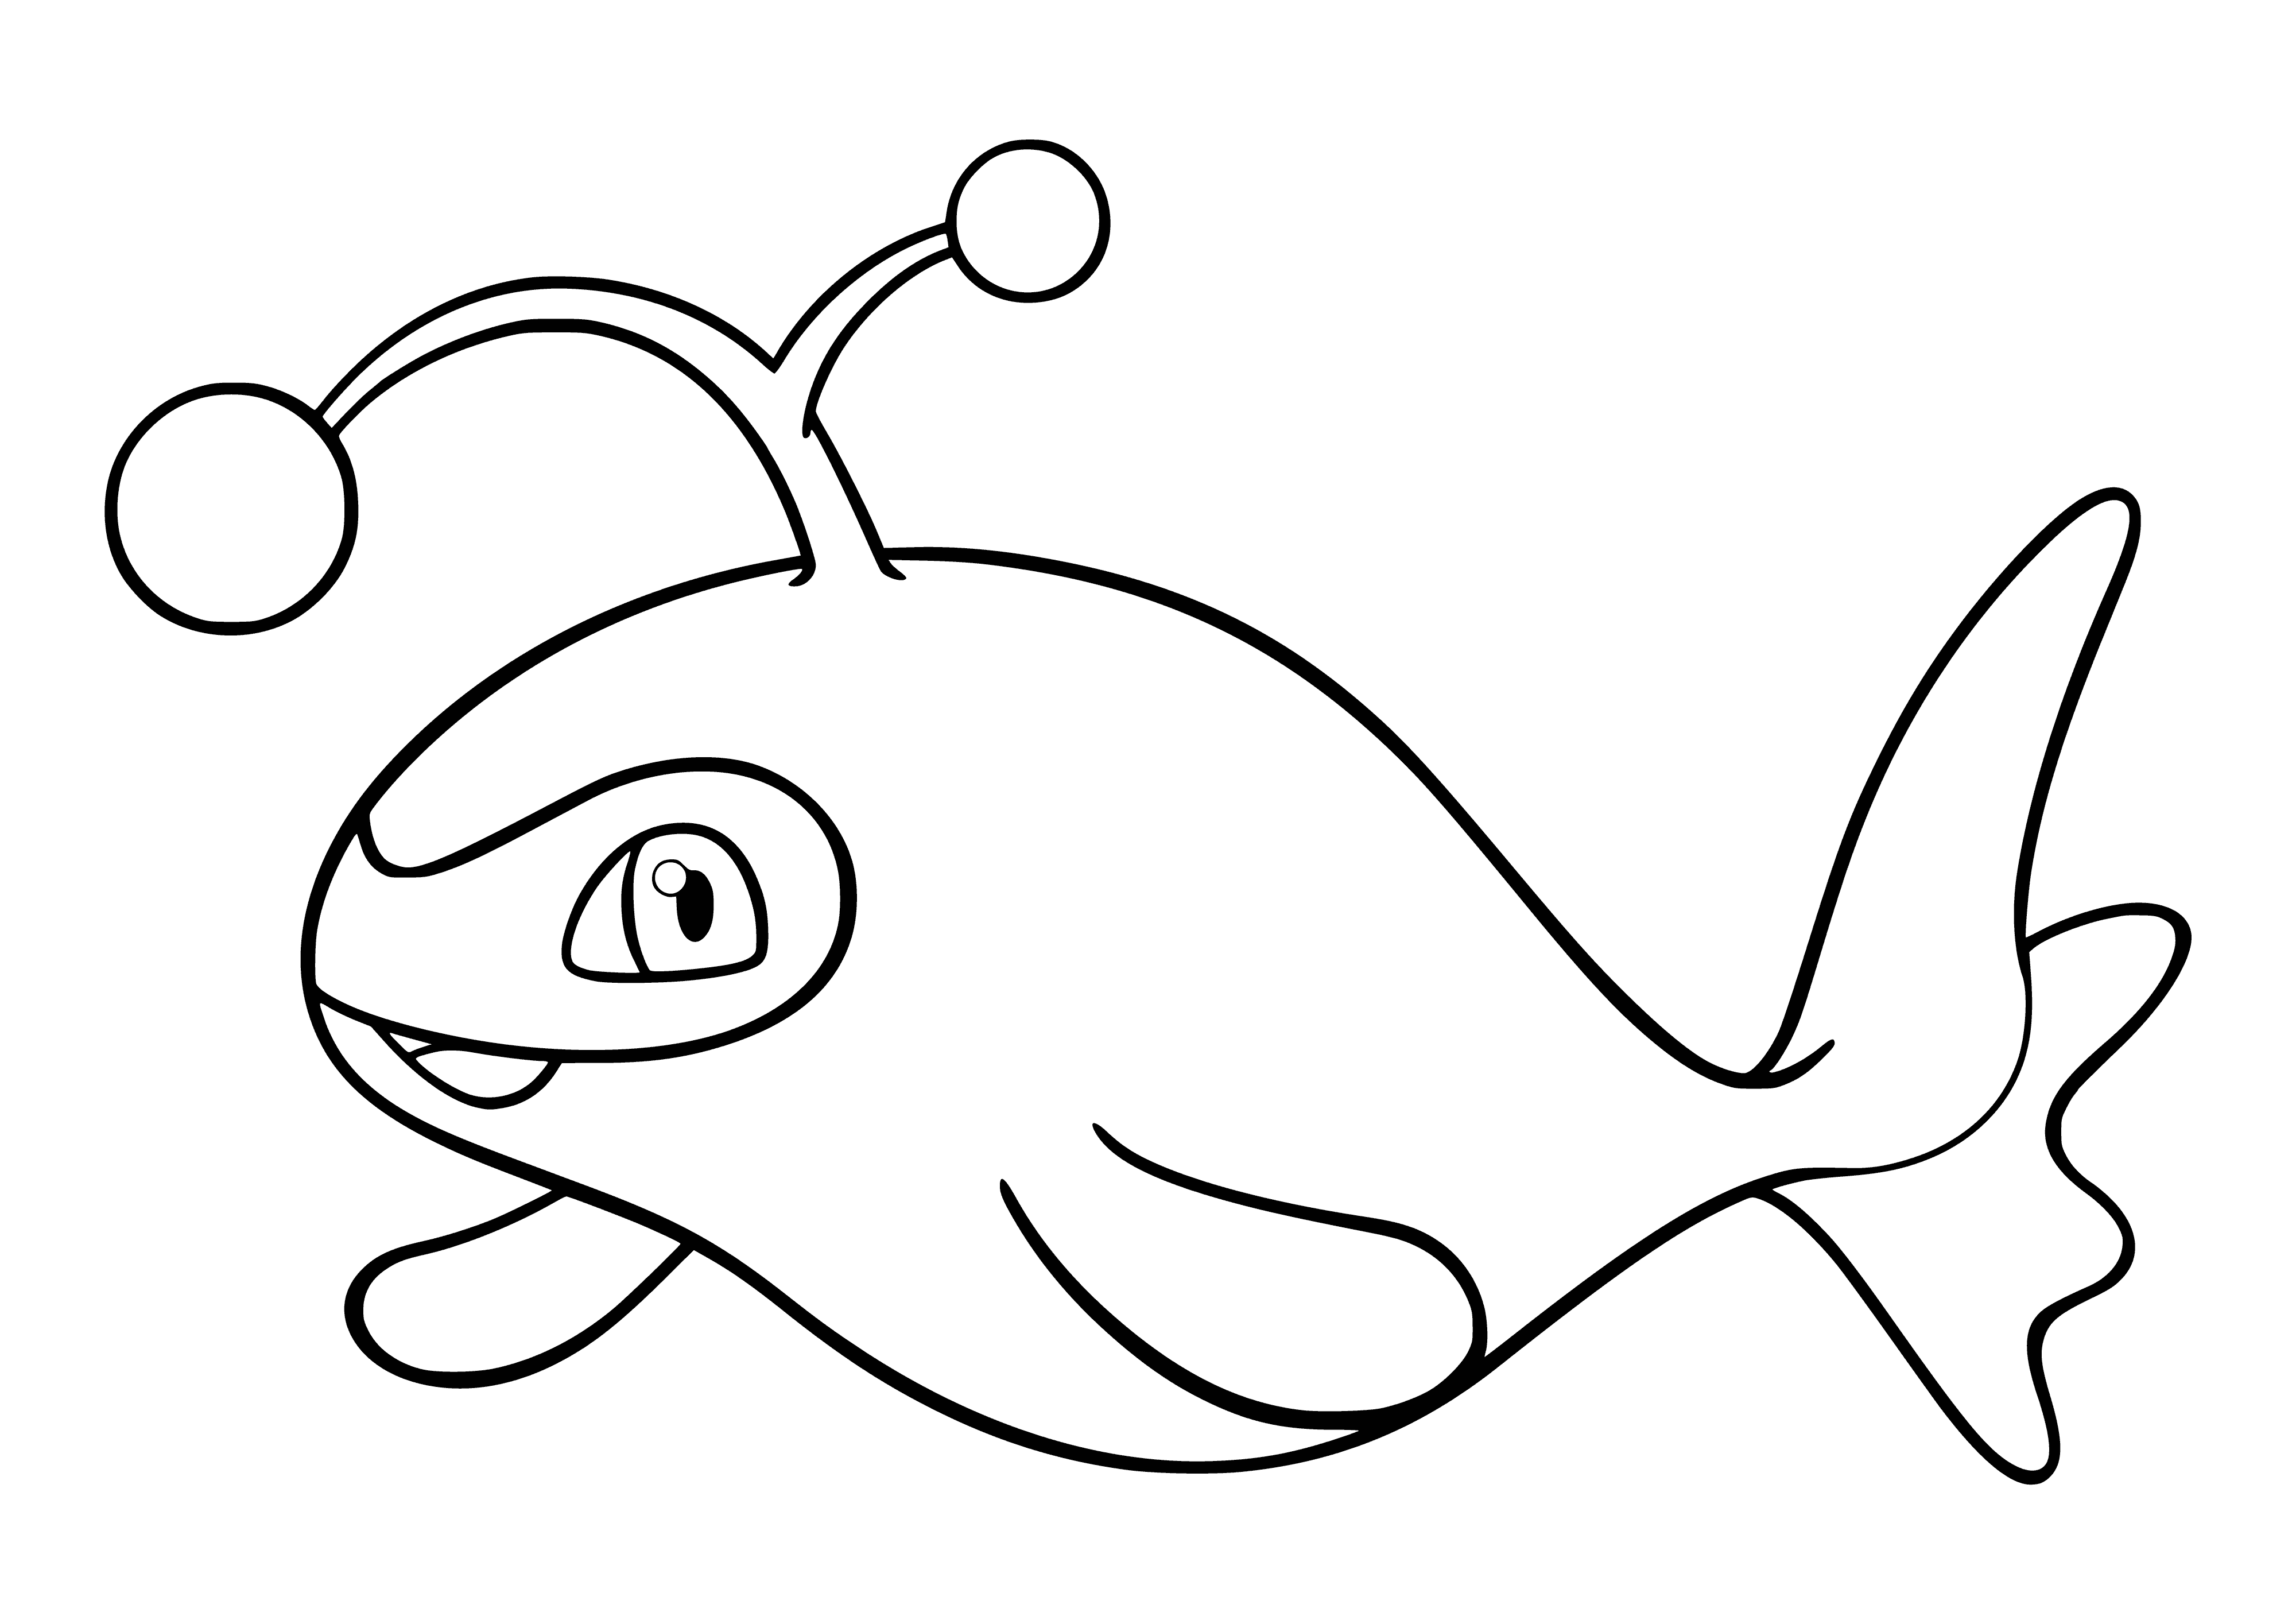 coloring page: Lanturn is a shy Pokémon resembling an anglerfish, blue & yellow, with sharp small teeth and 2 long orange fins & tail. Rarely seen alone.